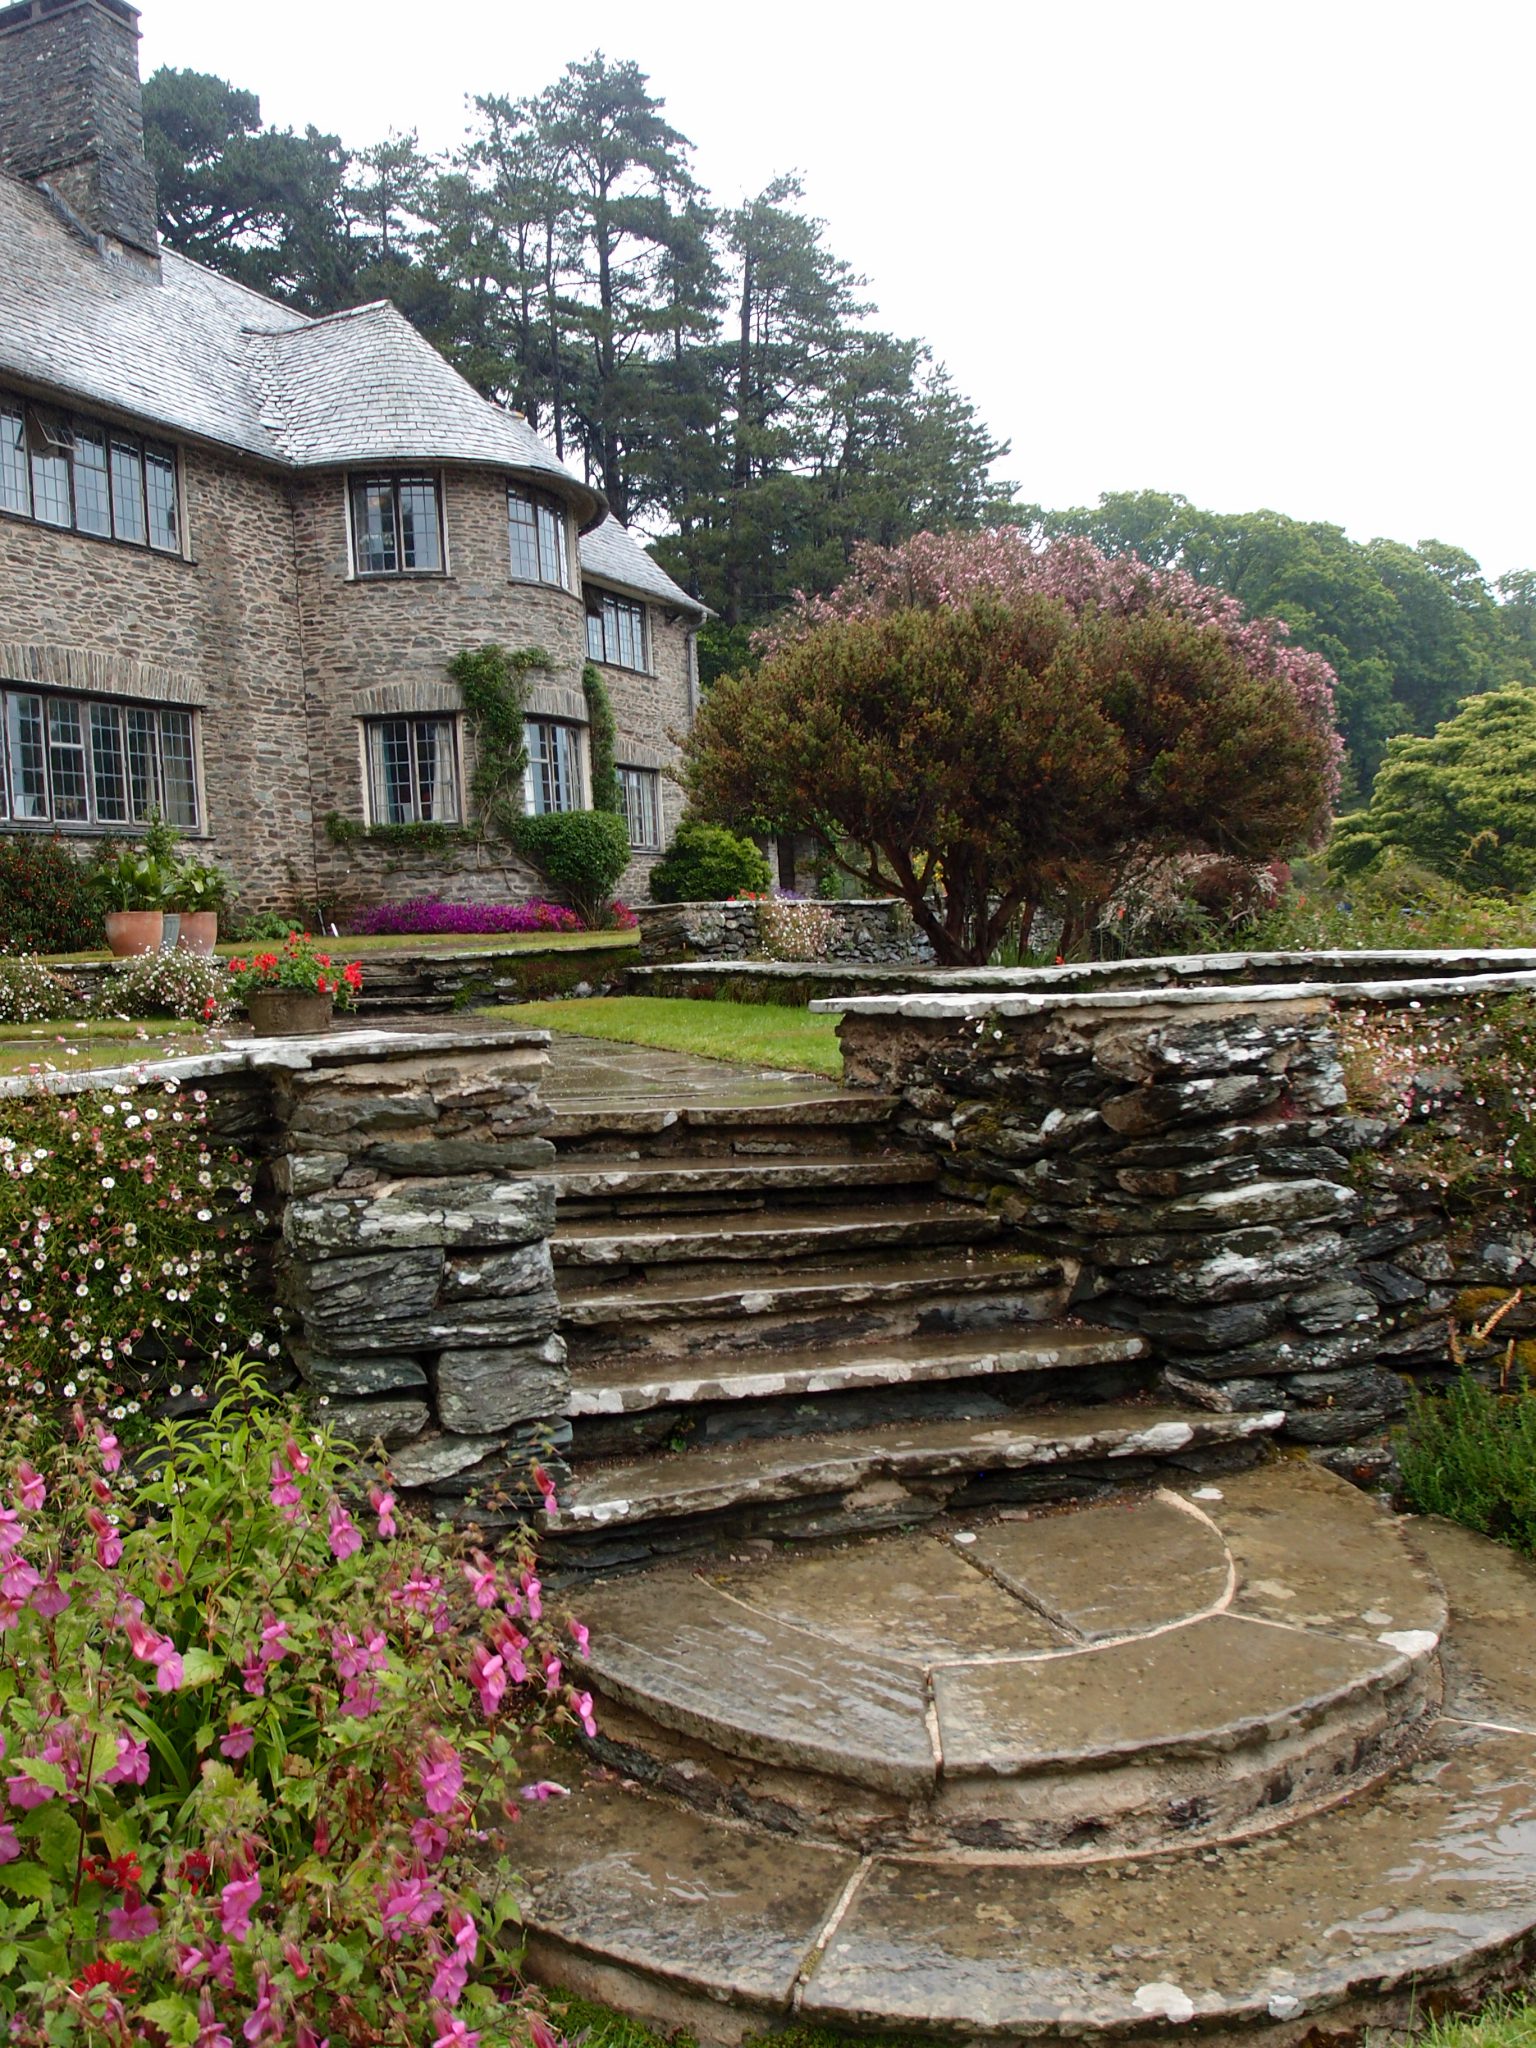 By the southwest corner of the House, a cascade of steps connects the Top and Middle Terraces.